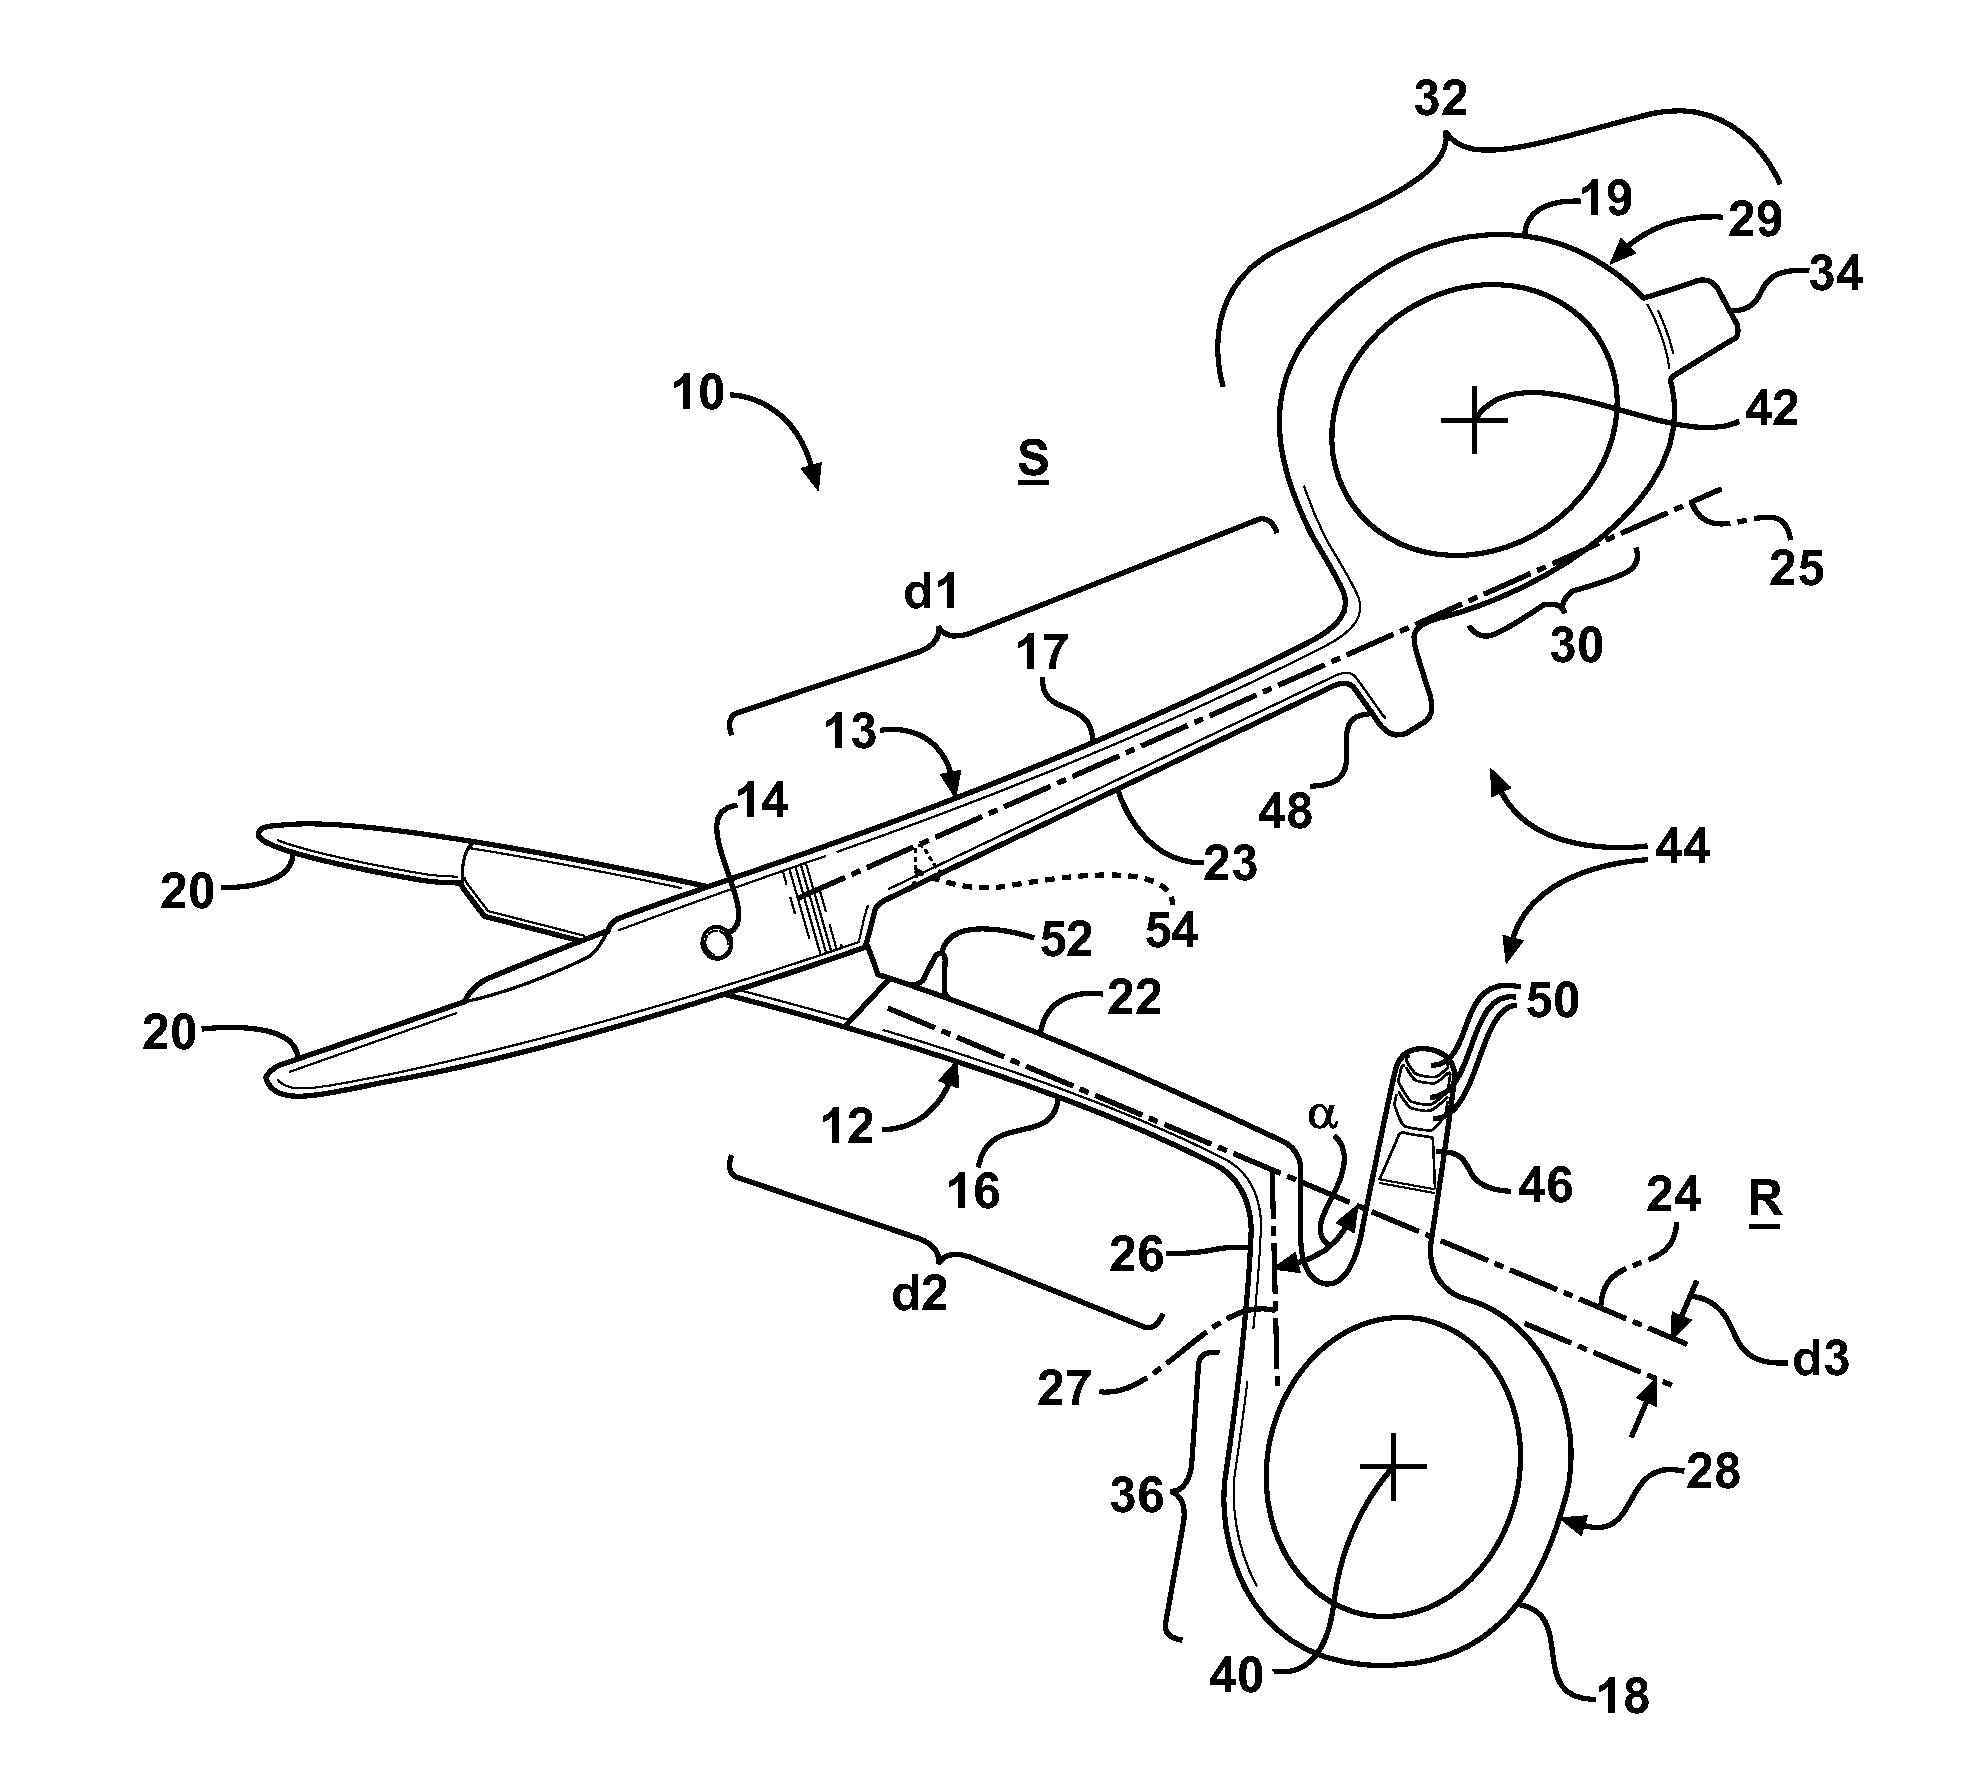 Hand tool articulating apparatus with offset handle